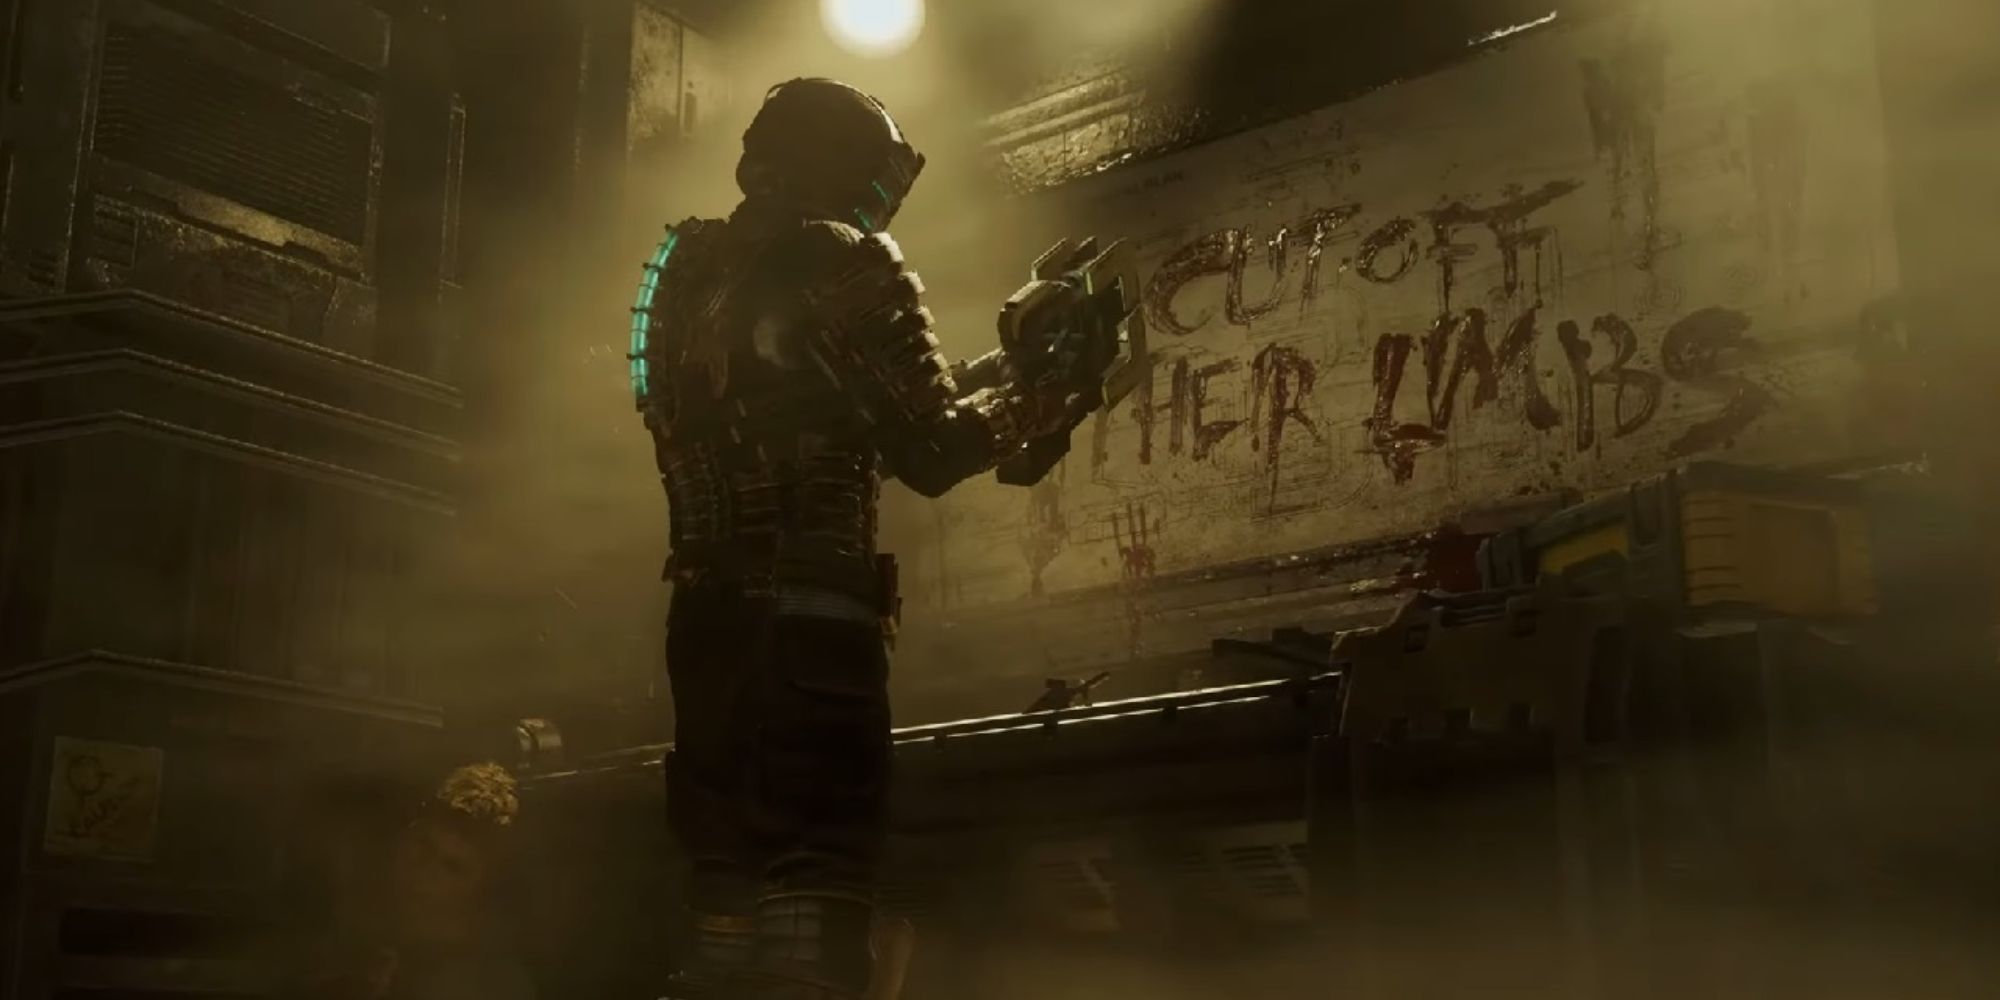 Dead Space isaac standing in front of "cut off their limbs" written in blood on the wall